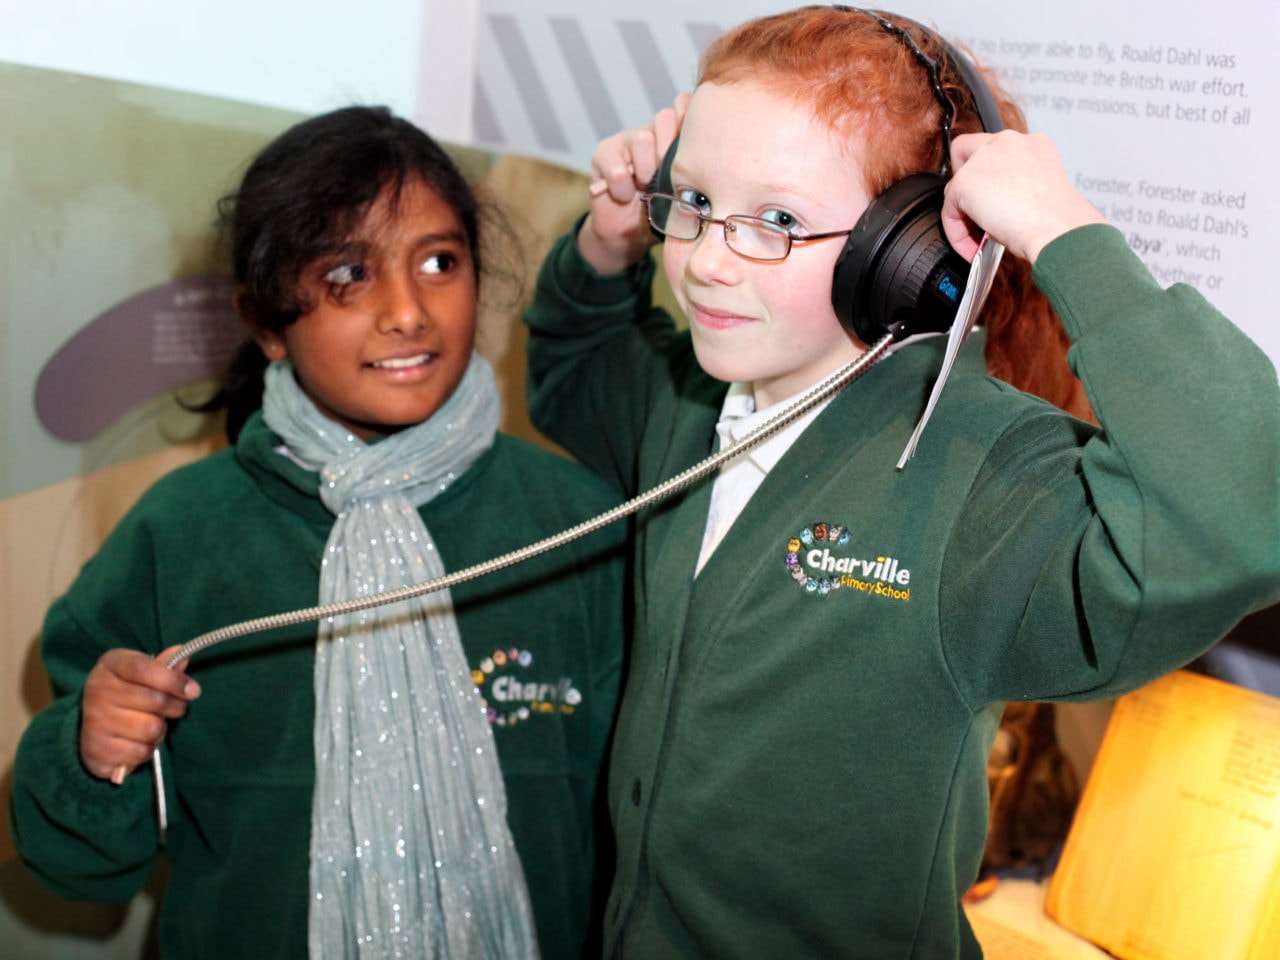 Two children in green school uniform in a museum gallery. One has headphones on her head and is holding them The other child is looking up towards her friend.